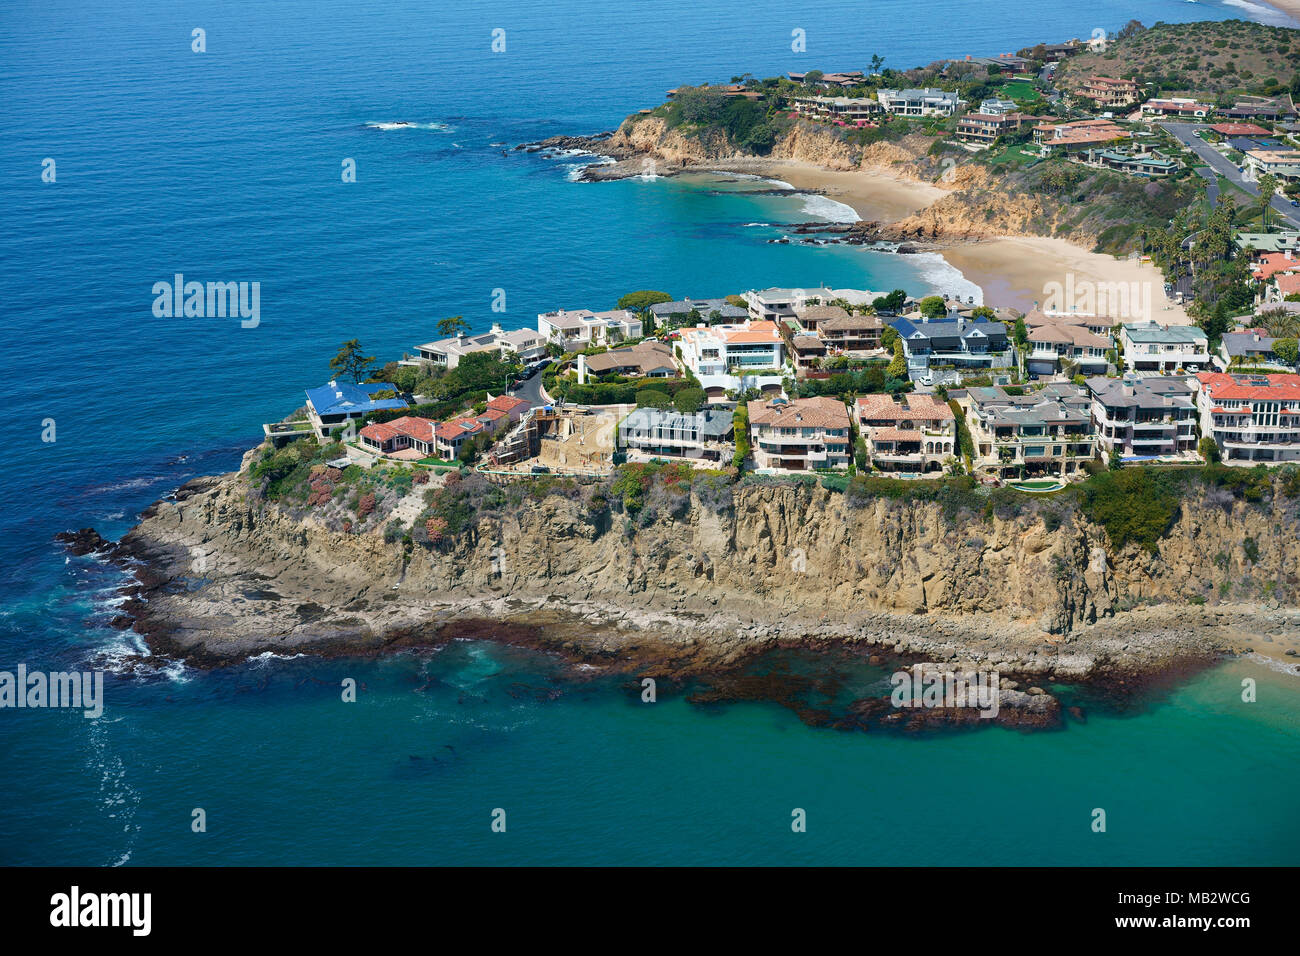 AERIAL VIEW. Luxurious properties on a picturesque rocky promontory. Emerald Point, Laguna Beach, Orange County, California, USA. Stock Photo